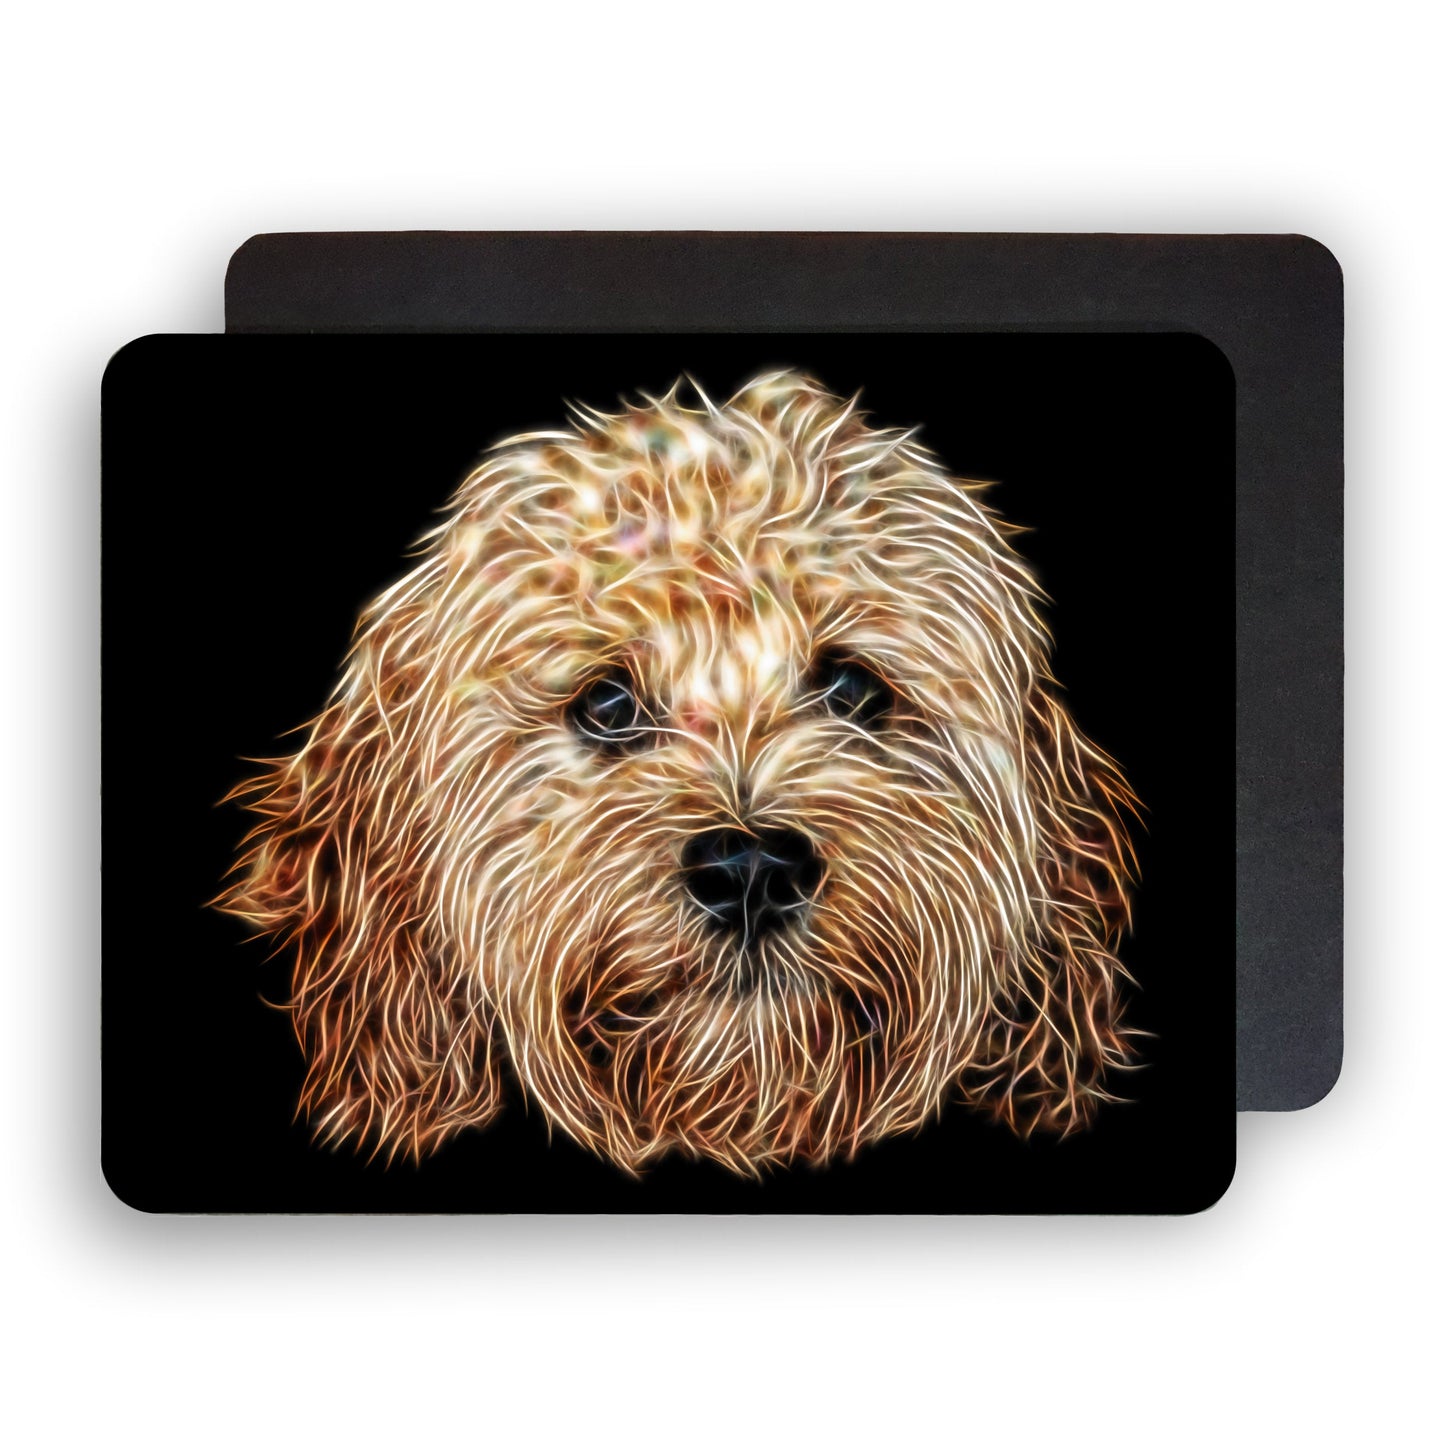 Apricot Cavapoo Placemats with Stunning Fractal Art Design. Set of Two.